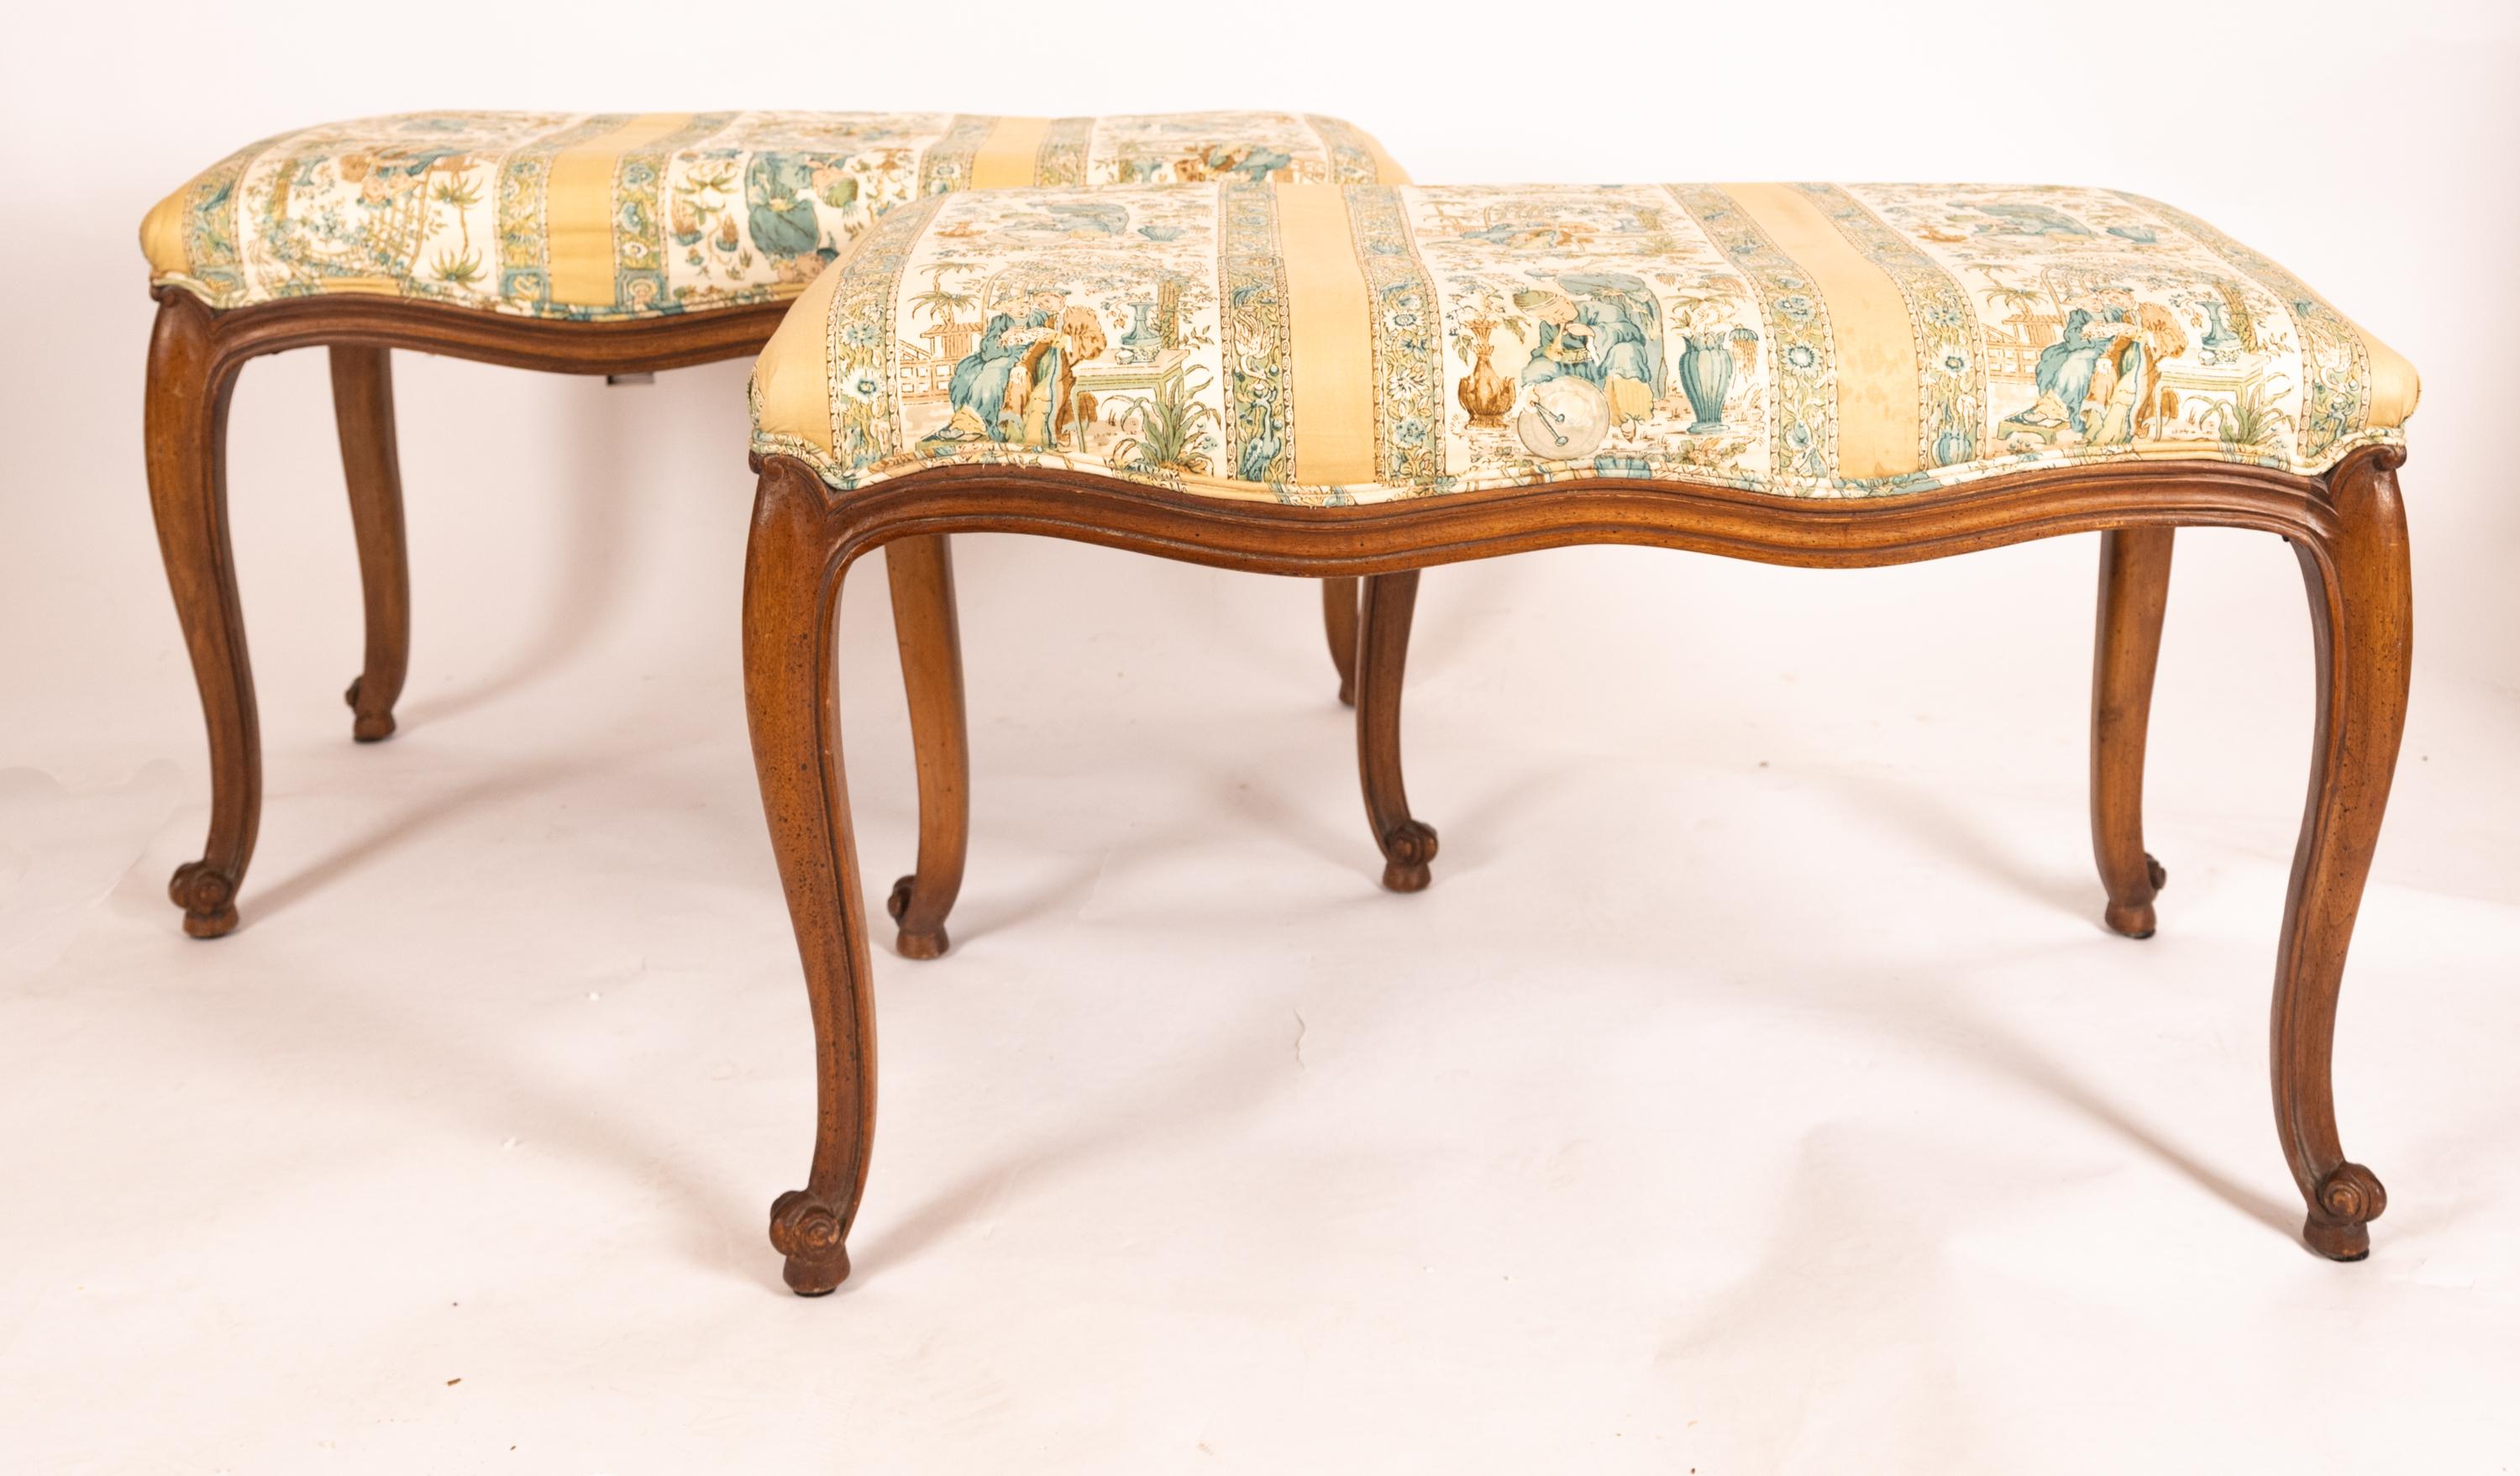 European Pair of 19th Century Louis XVth-Style Fruitwood Benches with Upholstered Seats For Sale